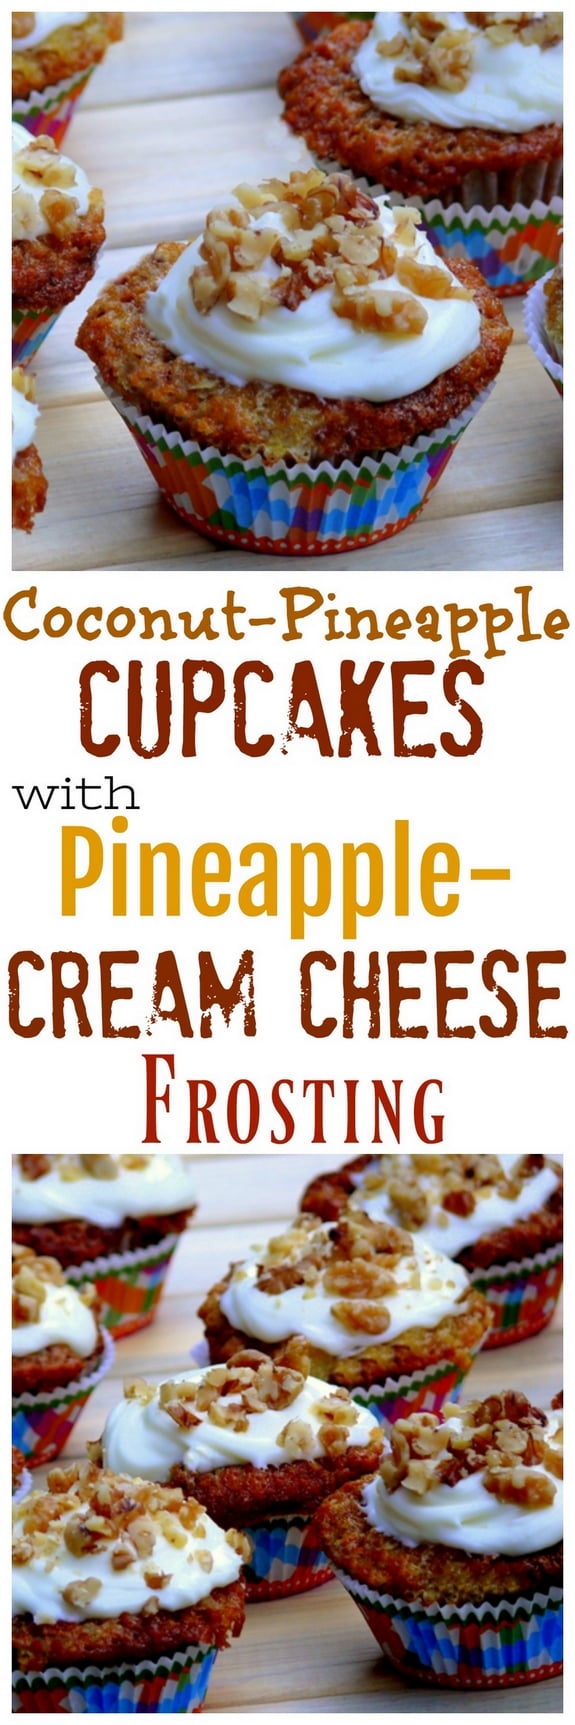 Coconut-Pineapple Cupcakes with Pineapple-Cream Cheese Frosting 